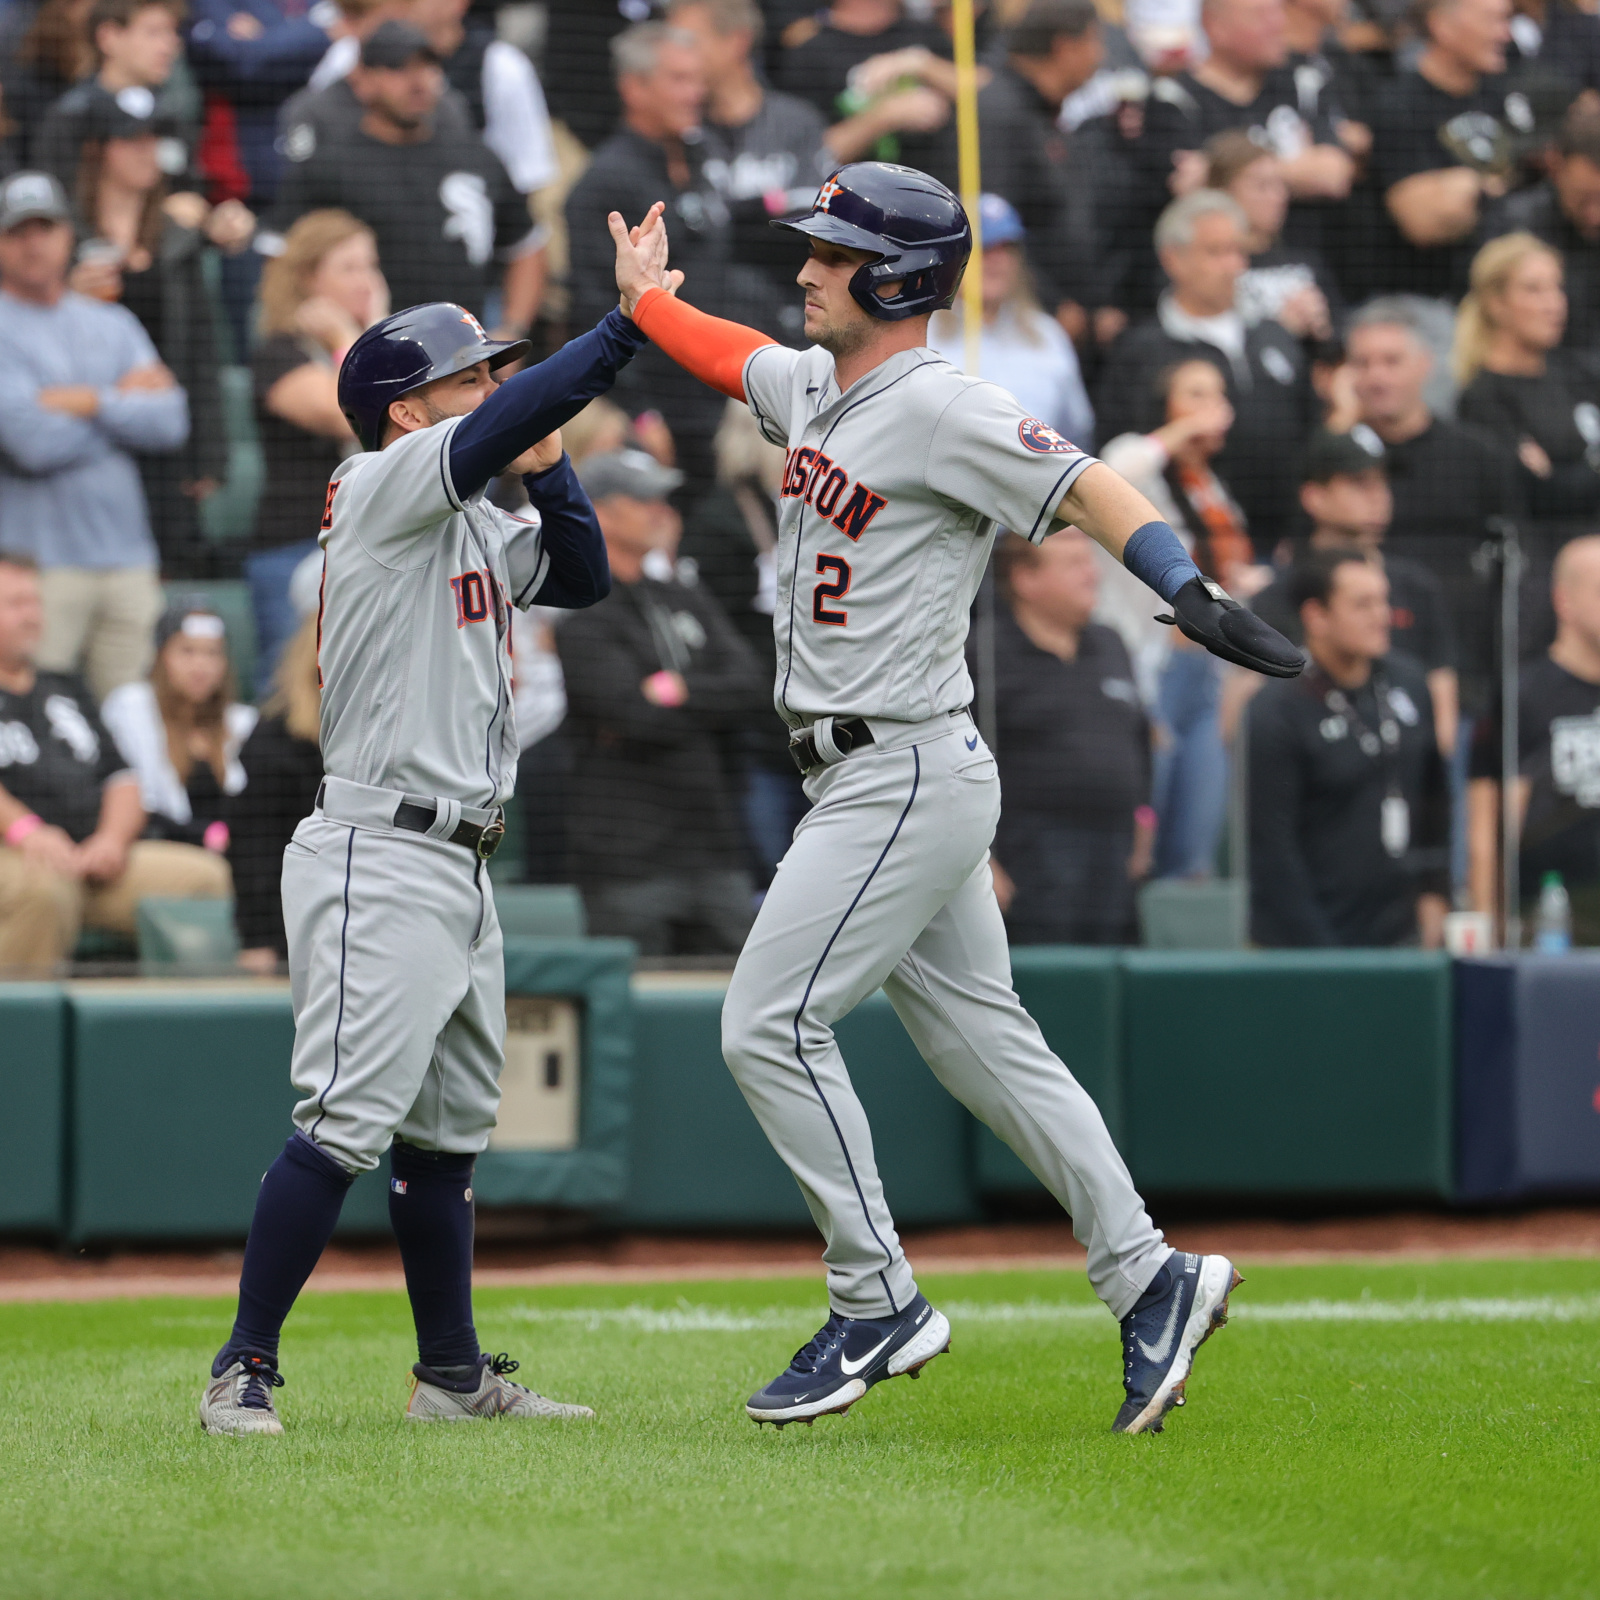 McCullers shines as Astros beat White Sox 6-1 in Game 1